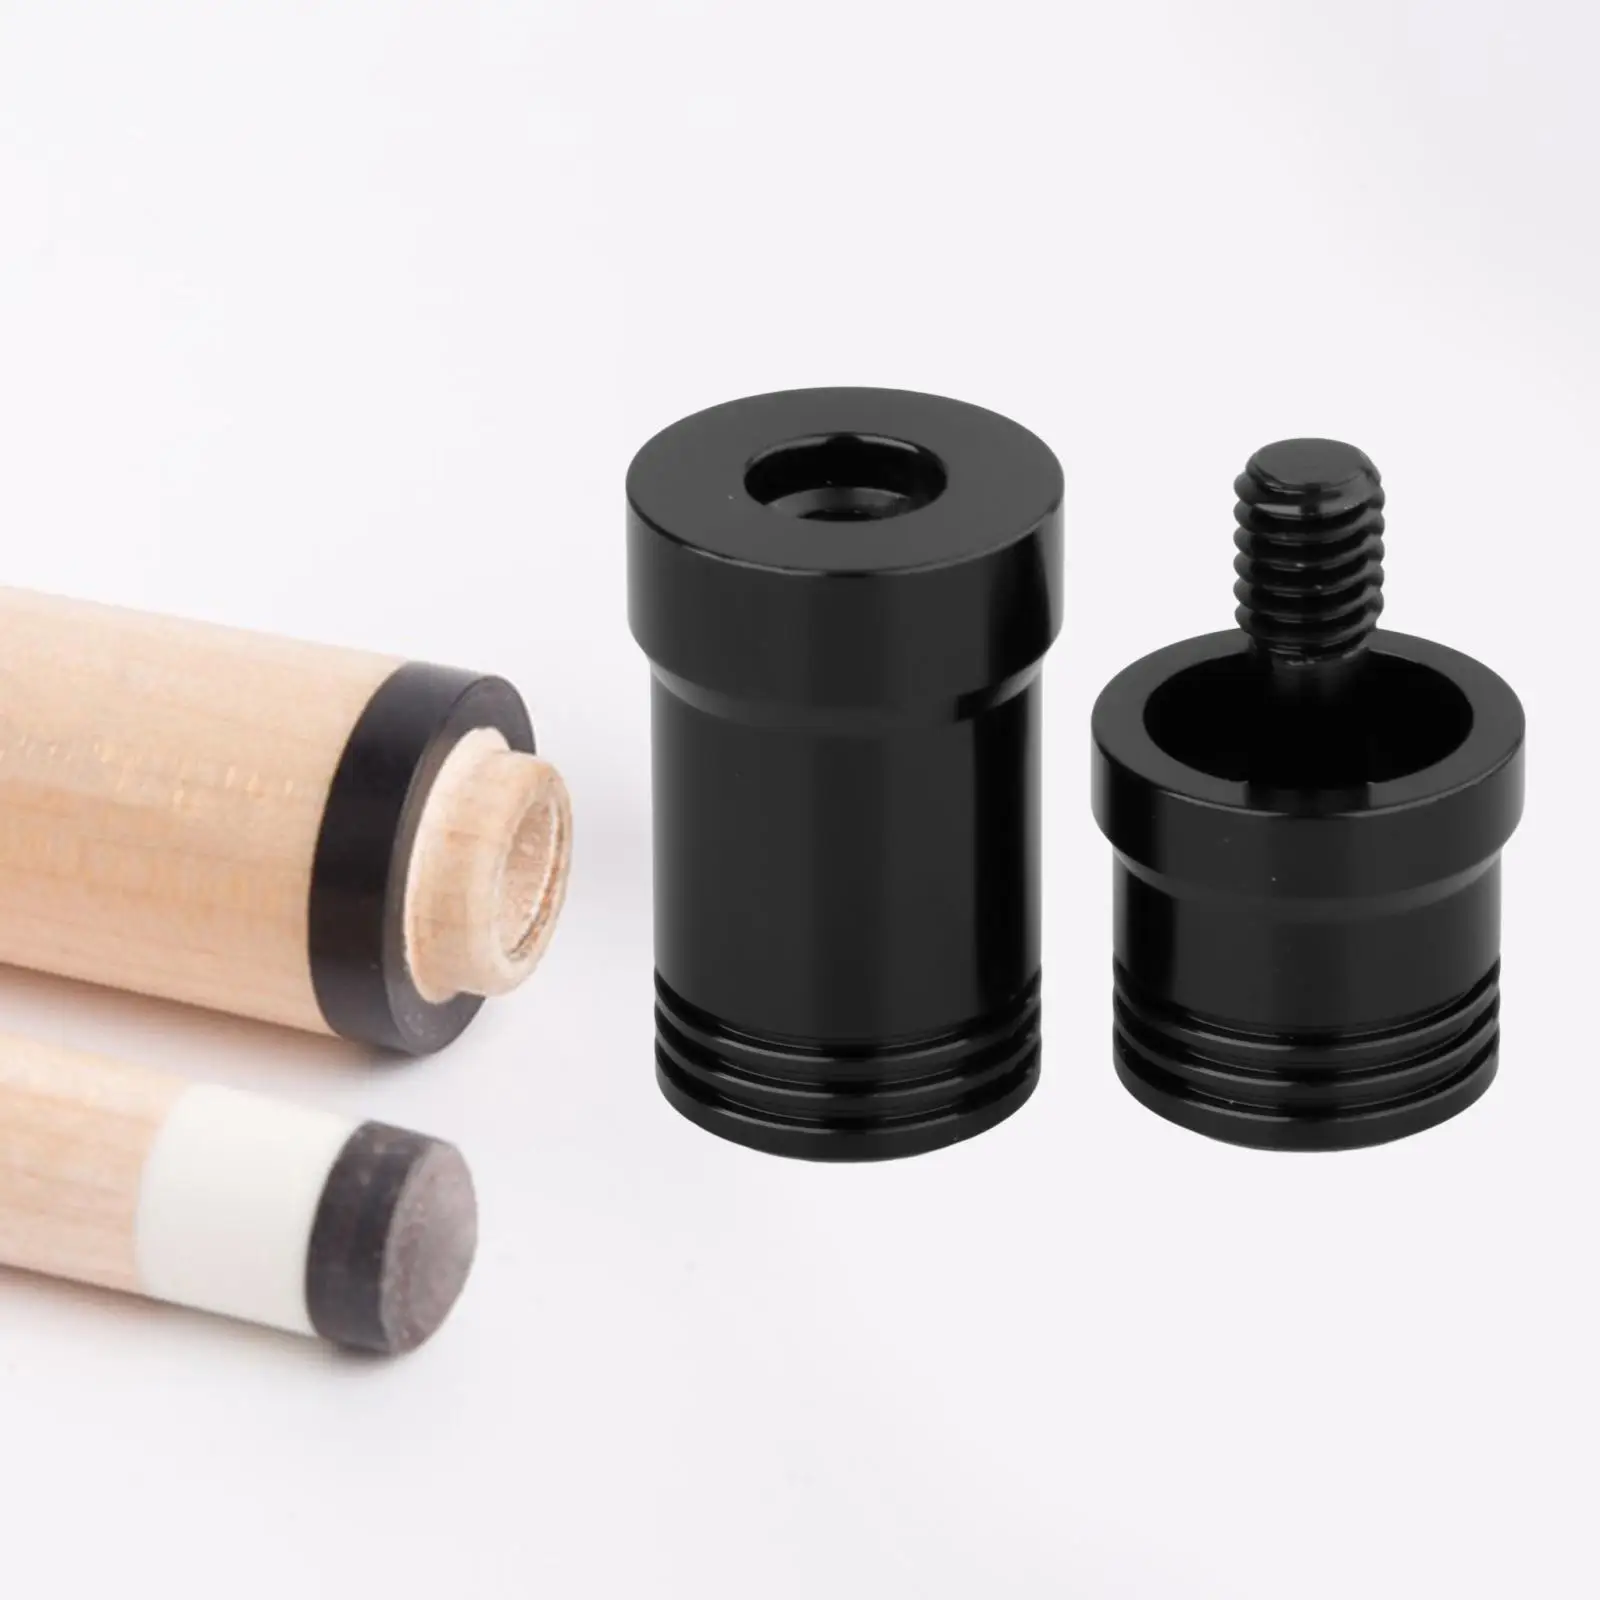 Joint Protectors for Pool Cue, Aluminum Billiard Cue Joint Cap for Snooker Protect Your Cue Billiard Accessories